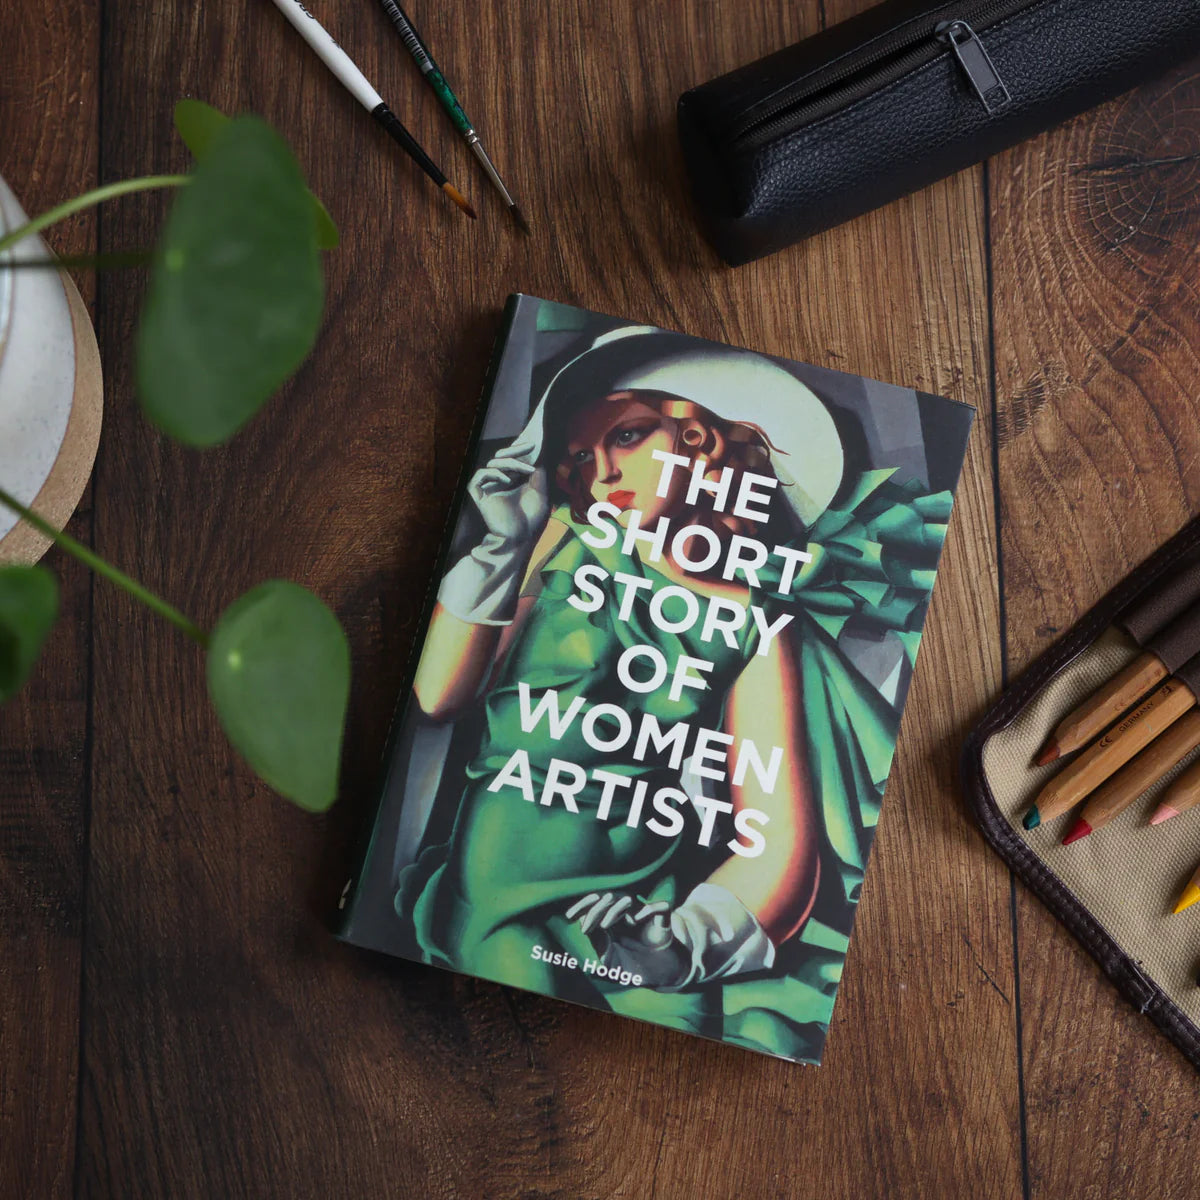 the short story of women artists - by susie hodge